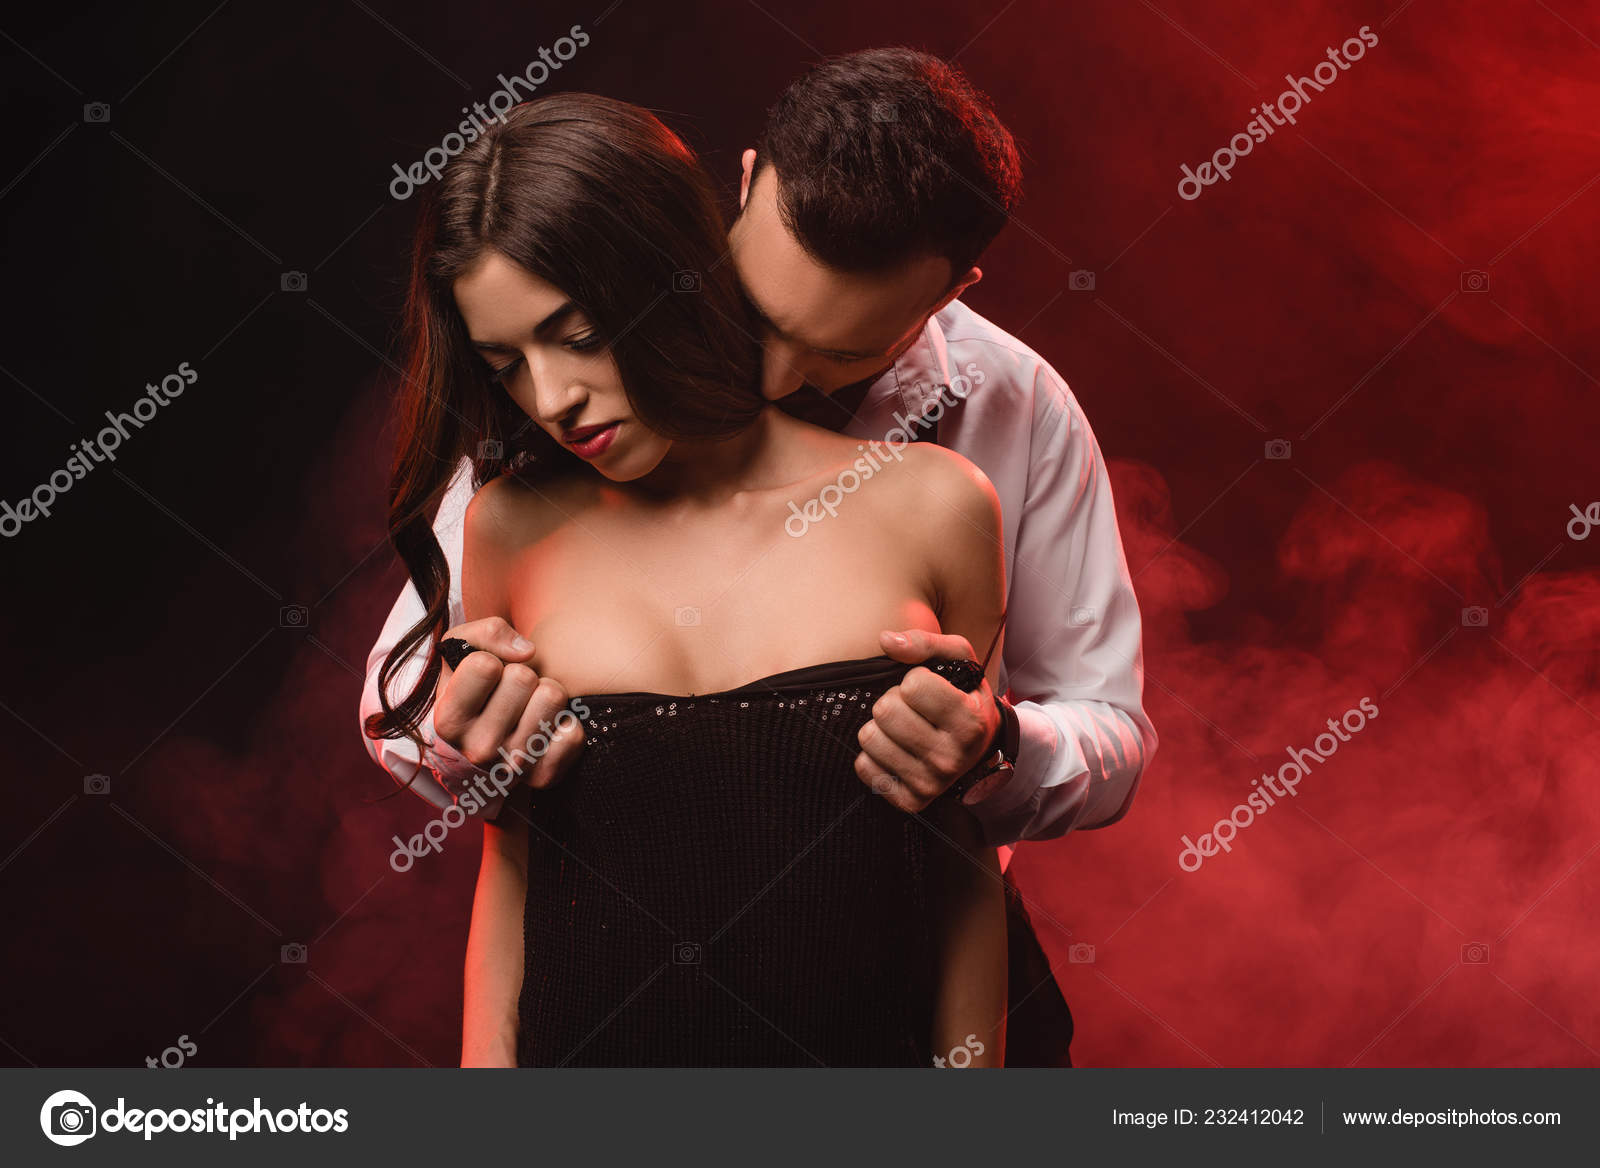 127735 Burning Passion Images, Stock Photos & Vectors